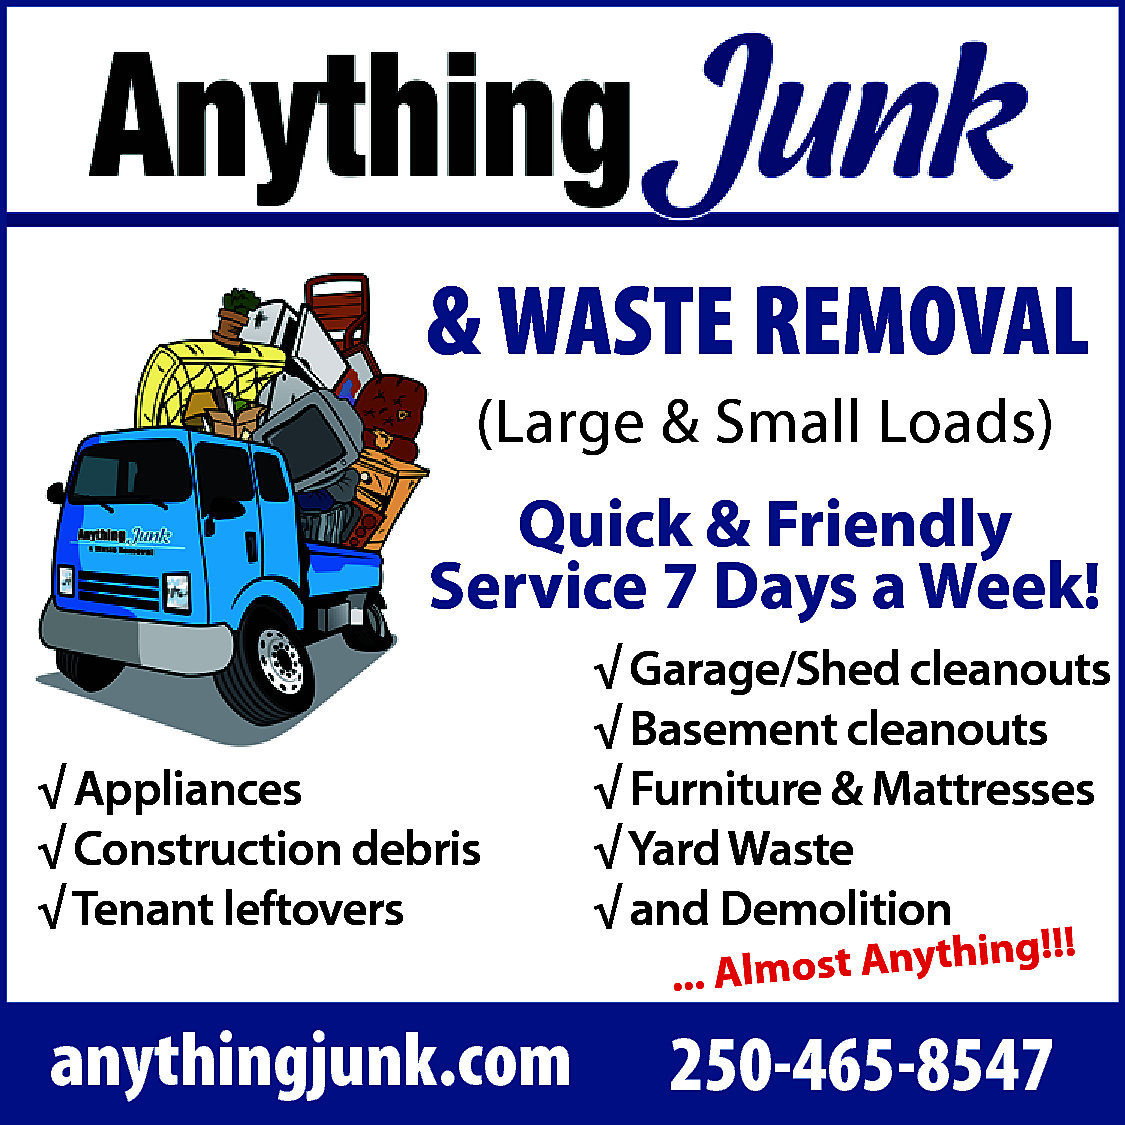 Anything Junk <br> <br>& WASTE  Anything Junk    & WASTE REMOVAL  (Large & Small Loads)    Quick & Friendly  Service 7 Days a Week!  √ Appliances  √ Construction debris  √ Tenant leftovers    anythingjunk.com    √ Garage/Shed cleanouts  √ Basement cleanouts  √ Furniture & Mattresses  √ Yard Waste  √ and Demolition  hing!!!  ... Almost Anyt    250-465-8547    